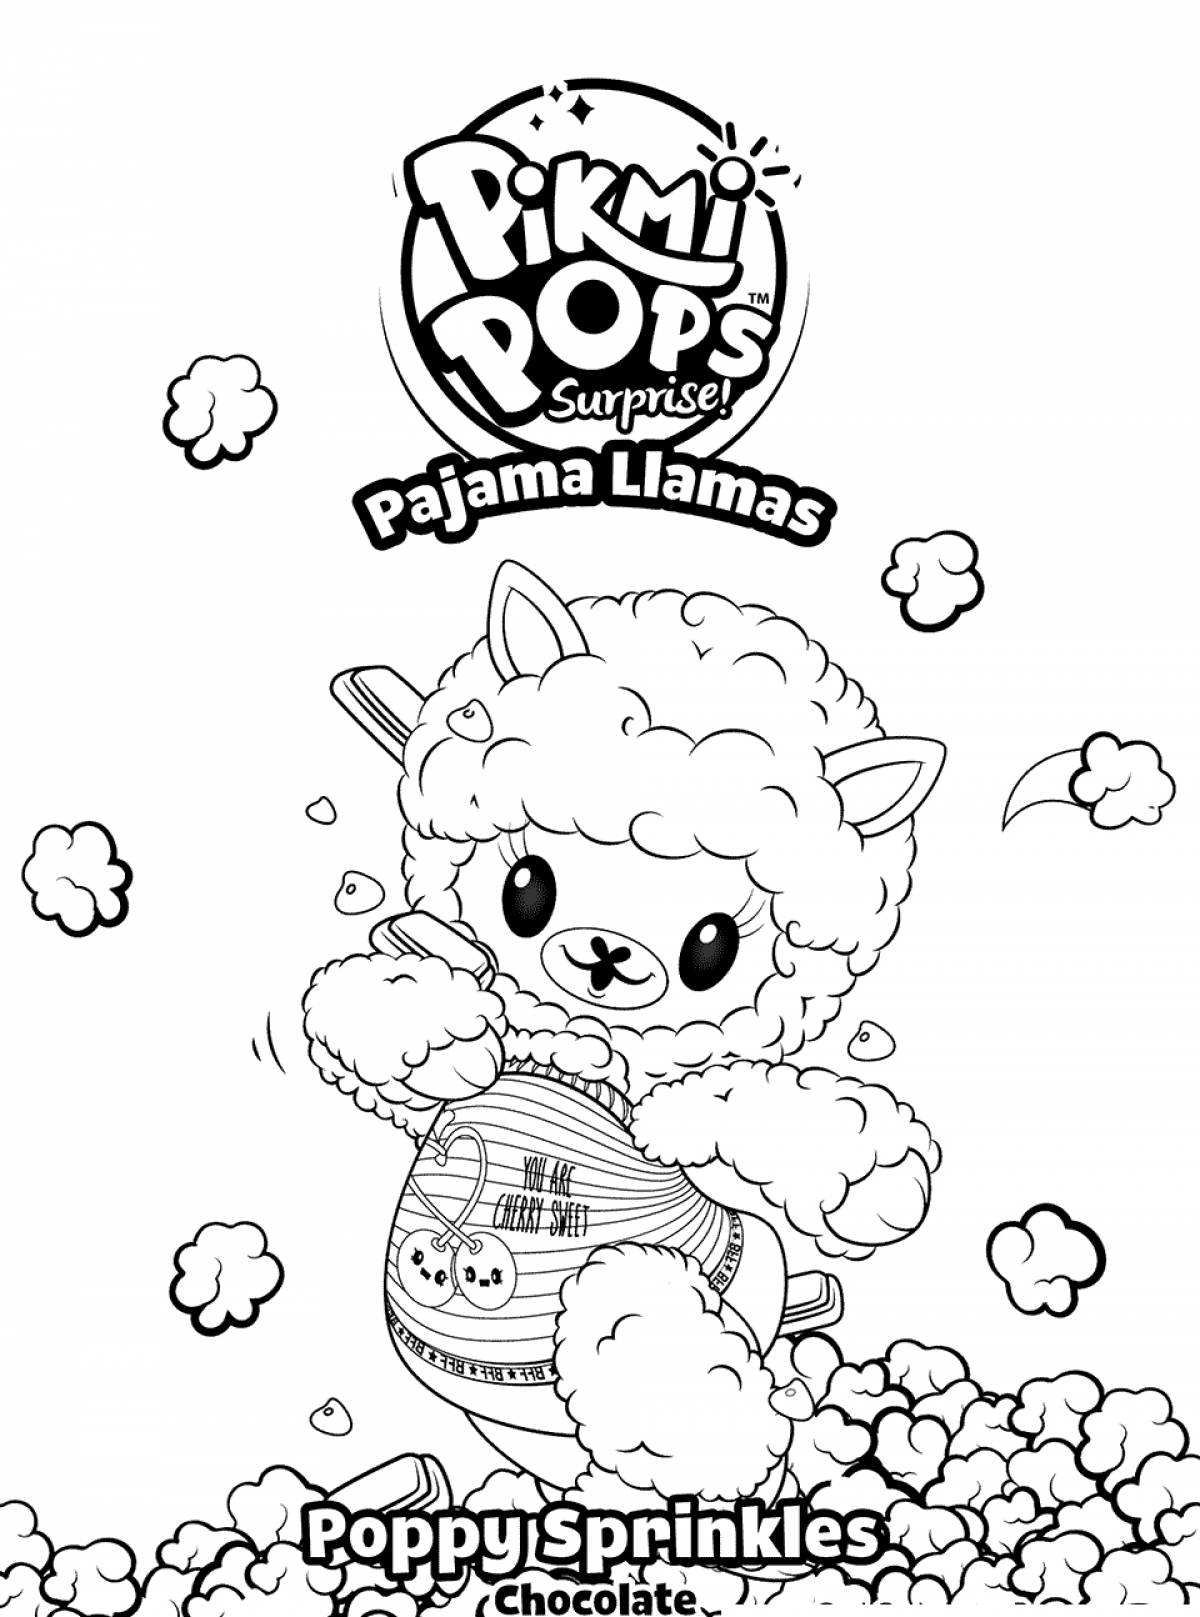 Colorful charm pikmy pops coloring page